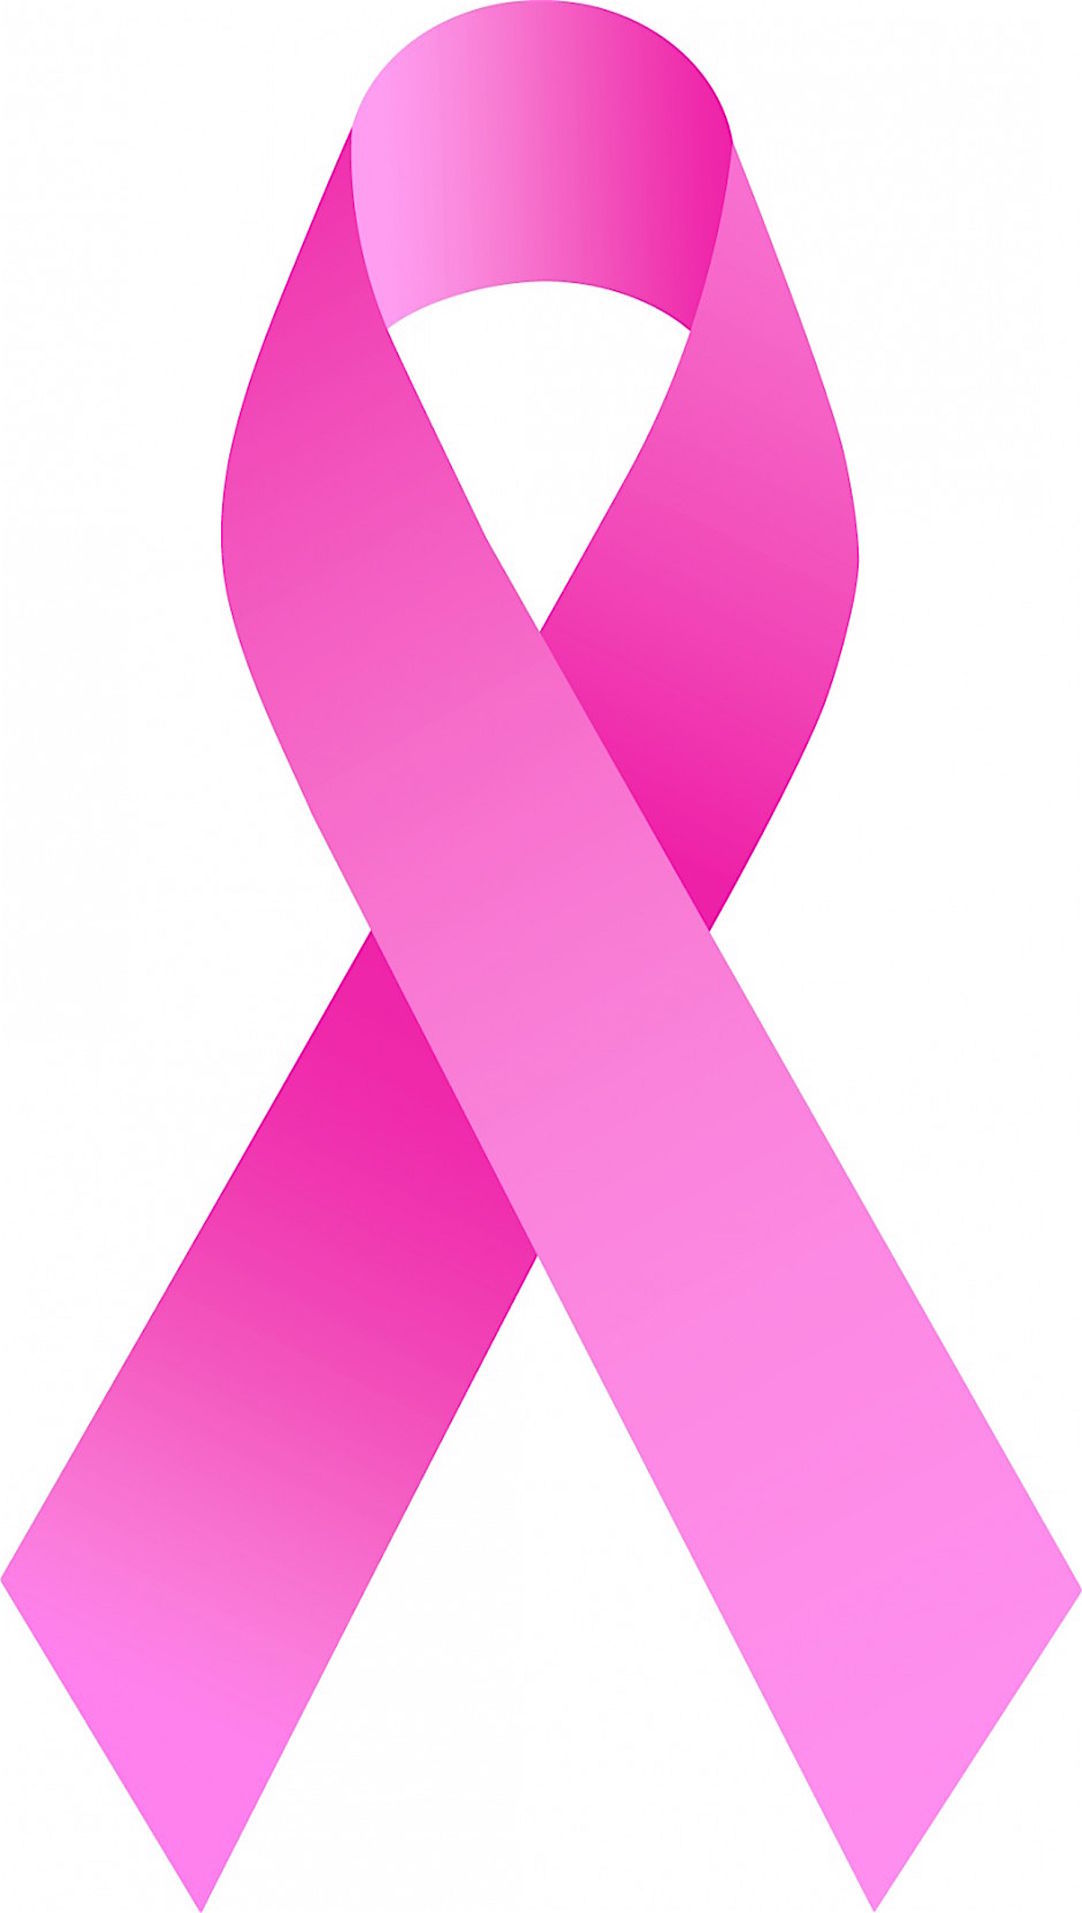 grants-provide-financial-support-for-breast-cancer-screening-treatment